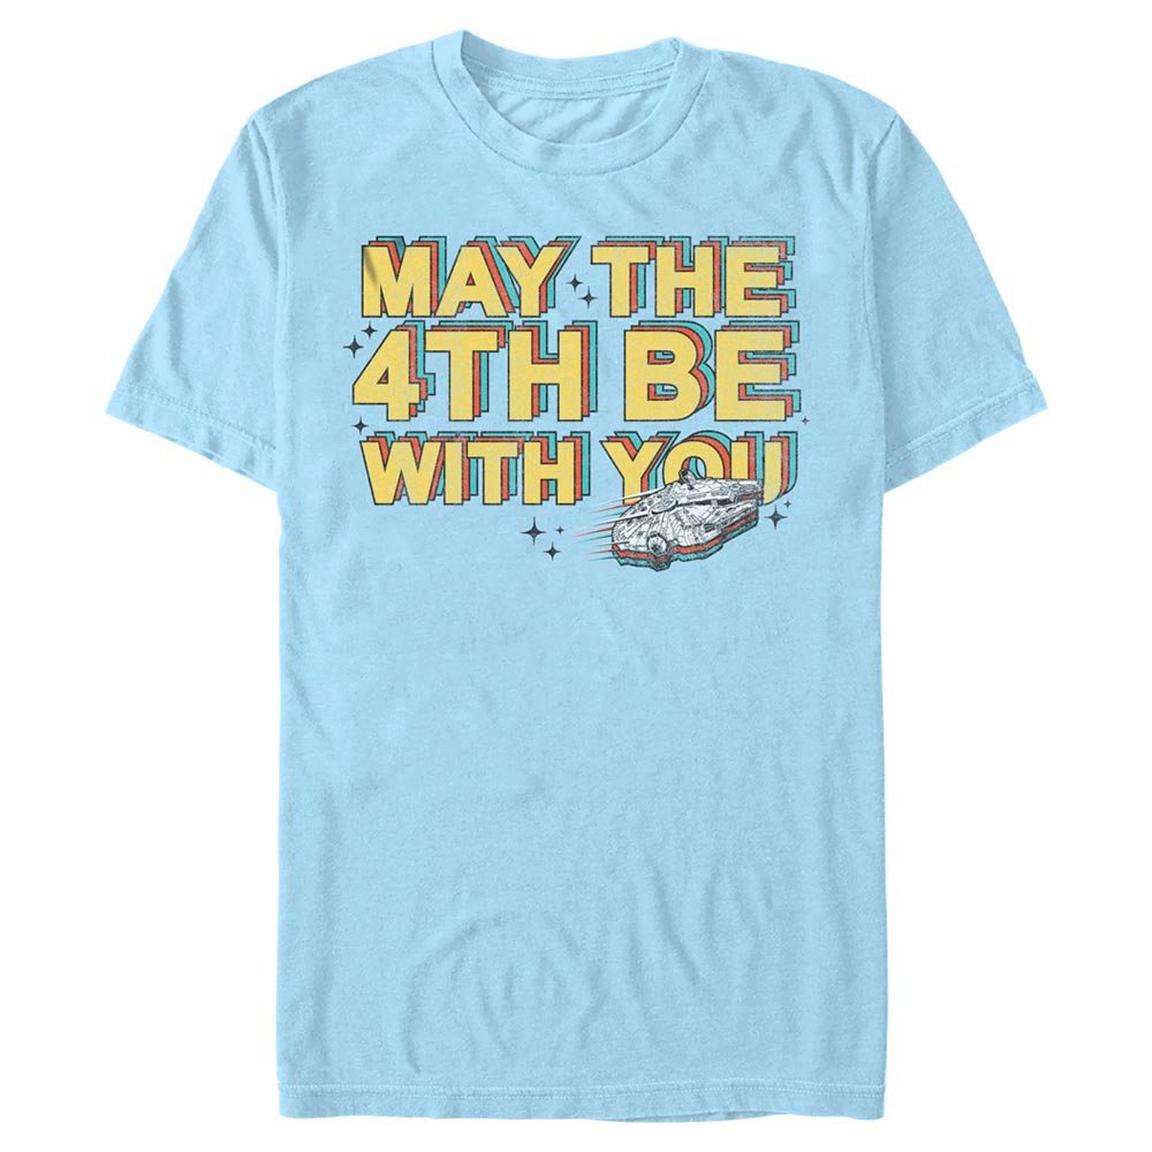 Star Wars May the 4th Be With You Millennium Falcon Unisex T-Shirt, Size: Large, Fifth Sun